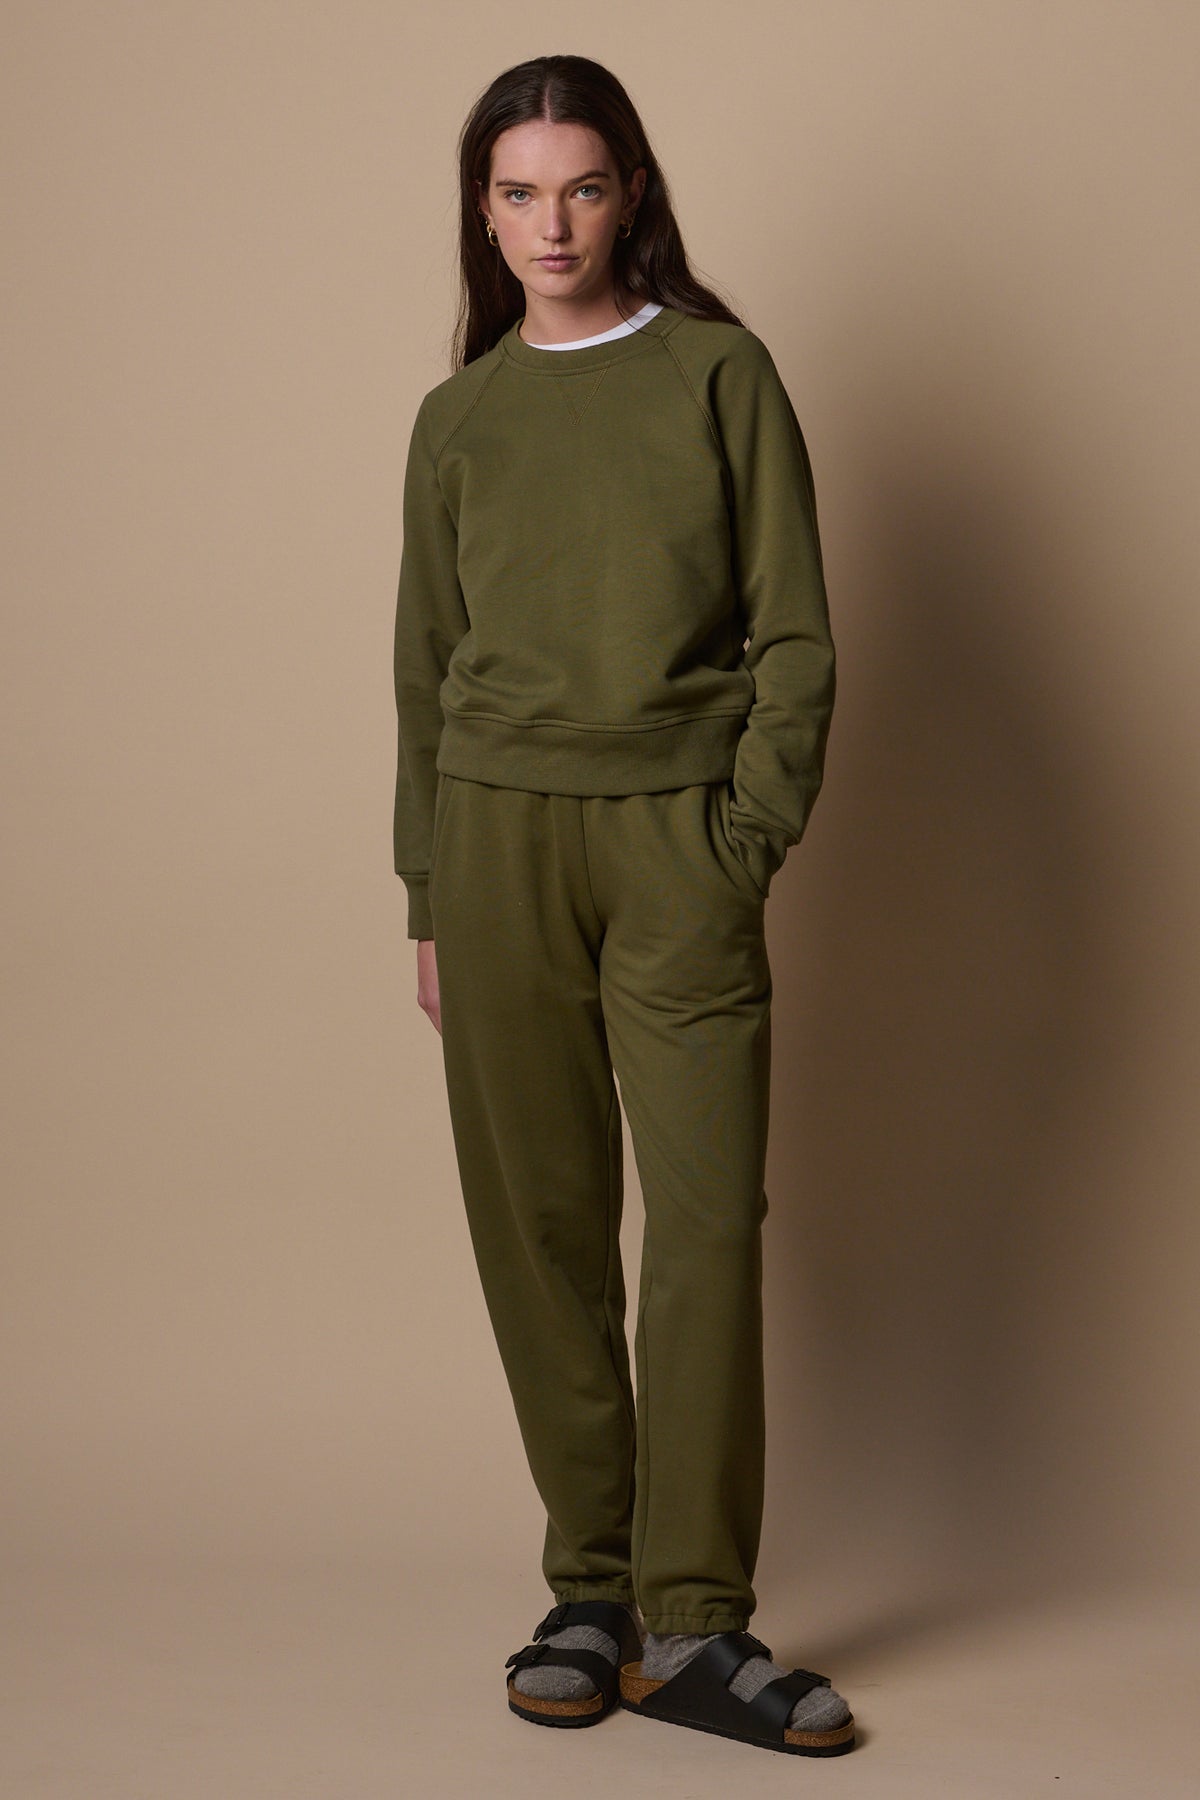 
            full boy image of the front of female wearing matching olive sweatpants and sweatshirt set